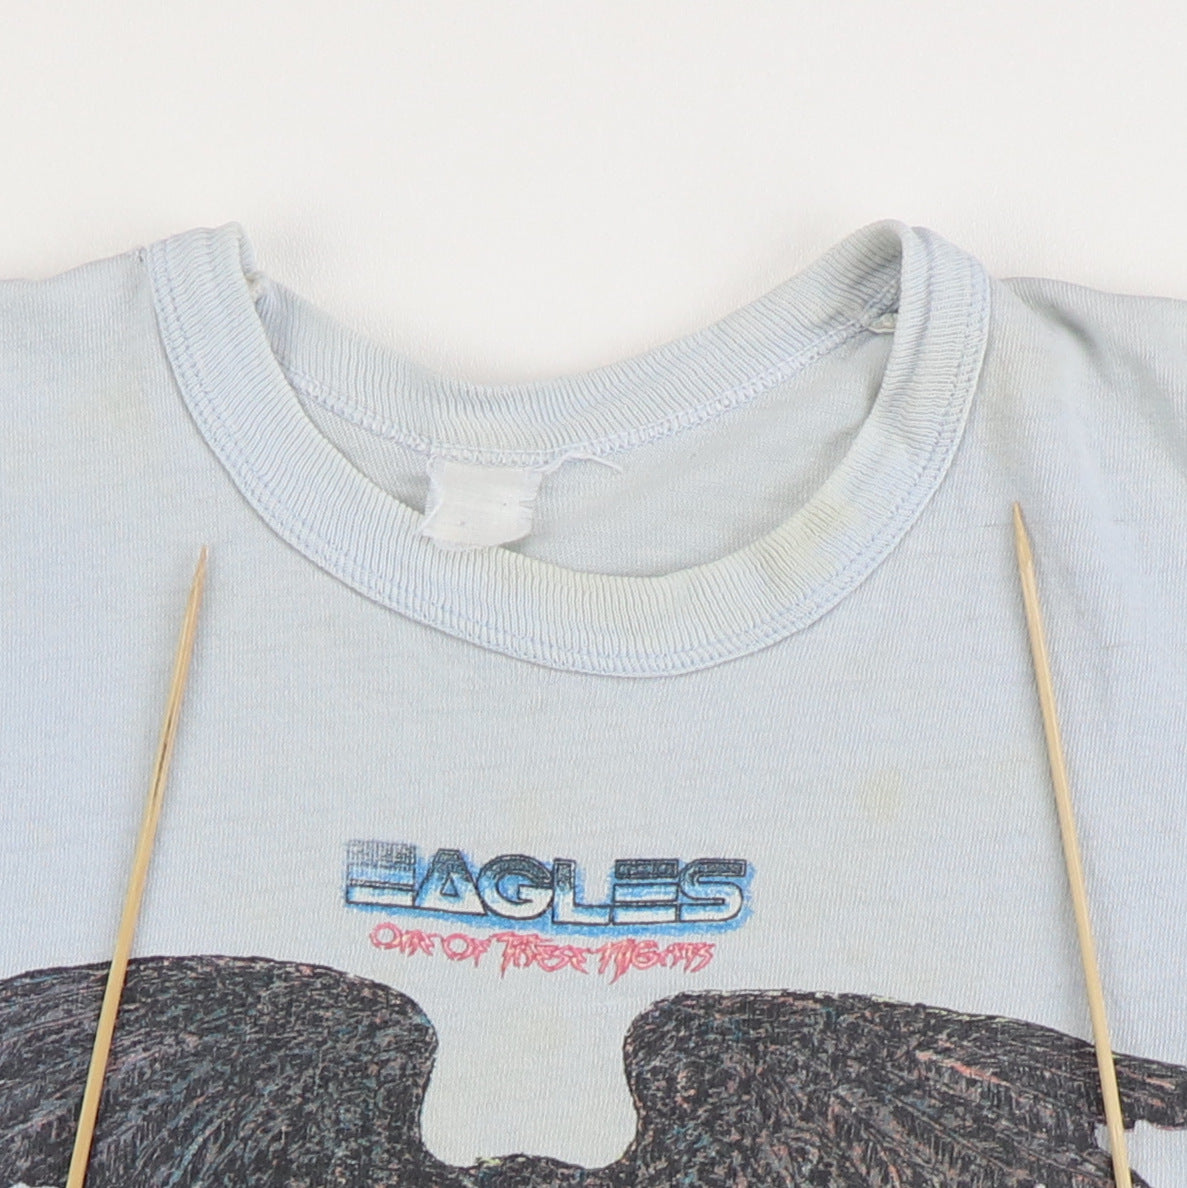 1975 The Eagles One Of These Nights Shirt